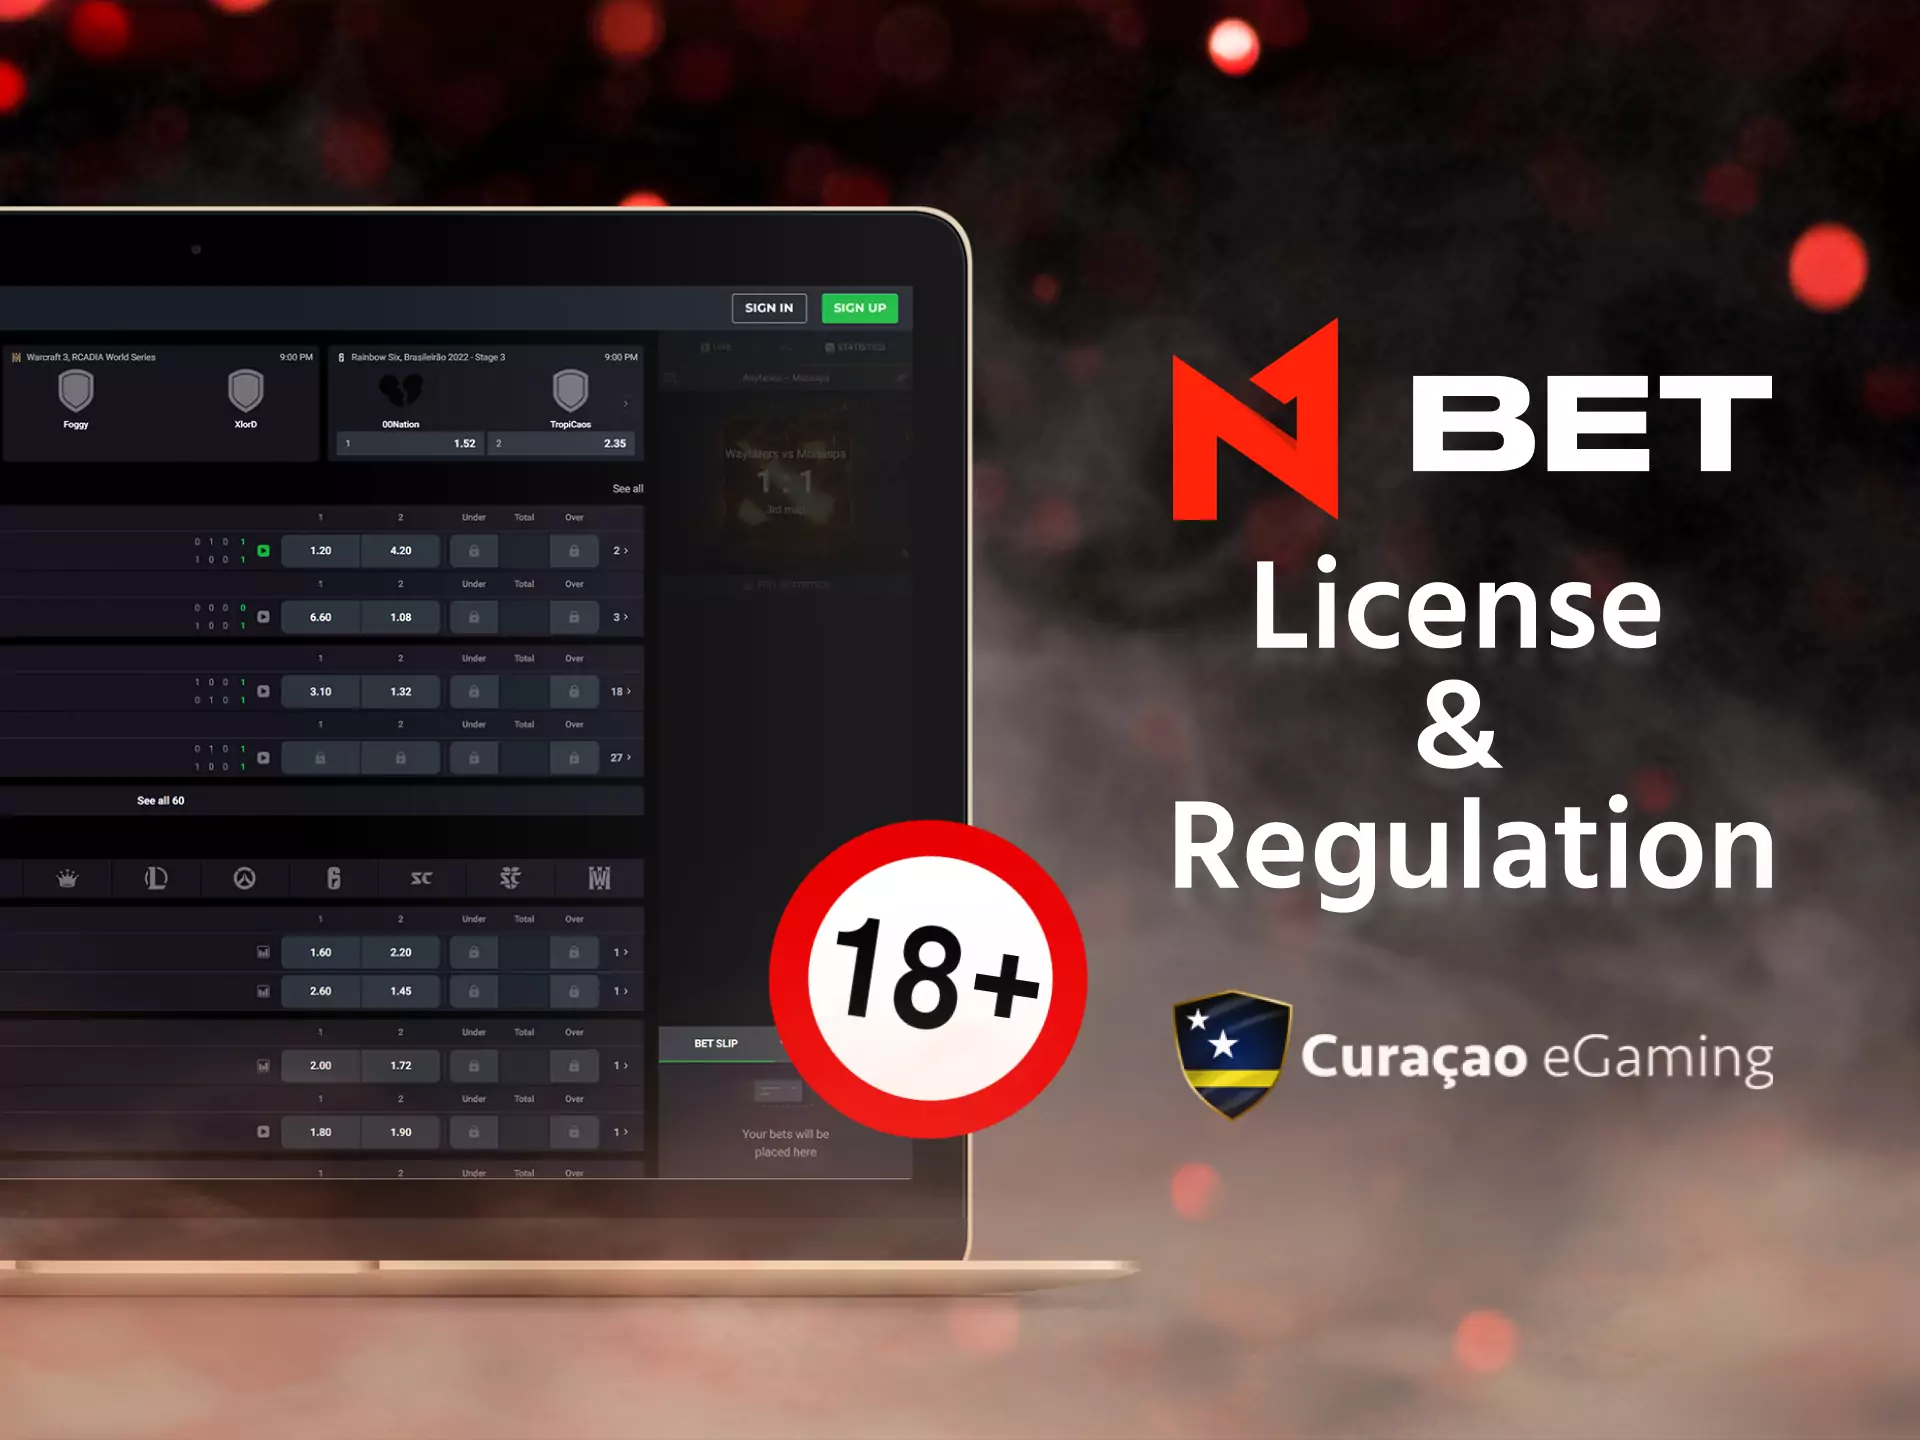 N1Bet is legal and safe for users.